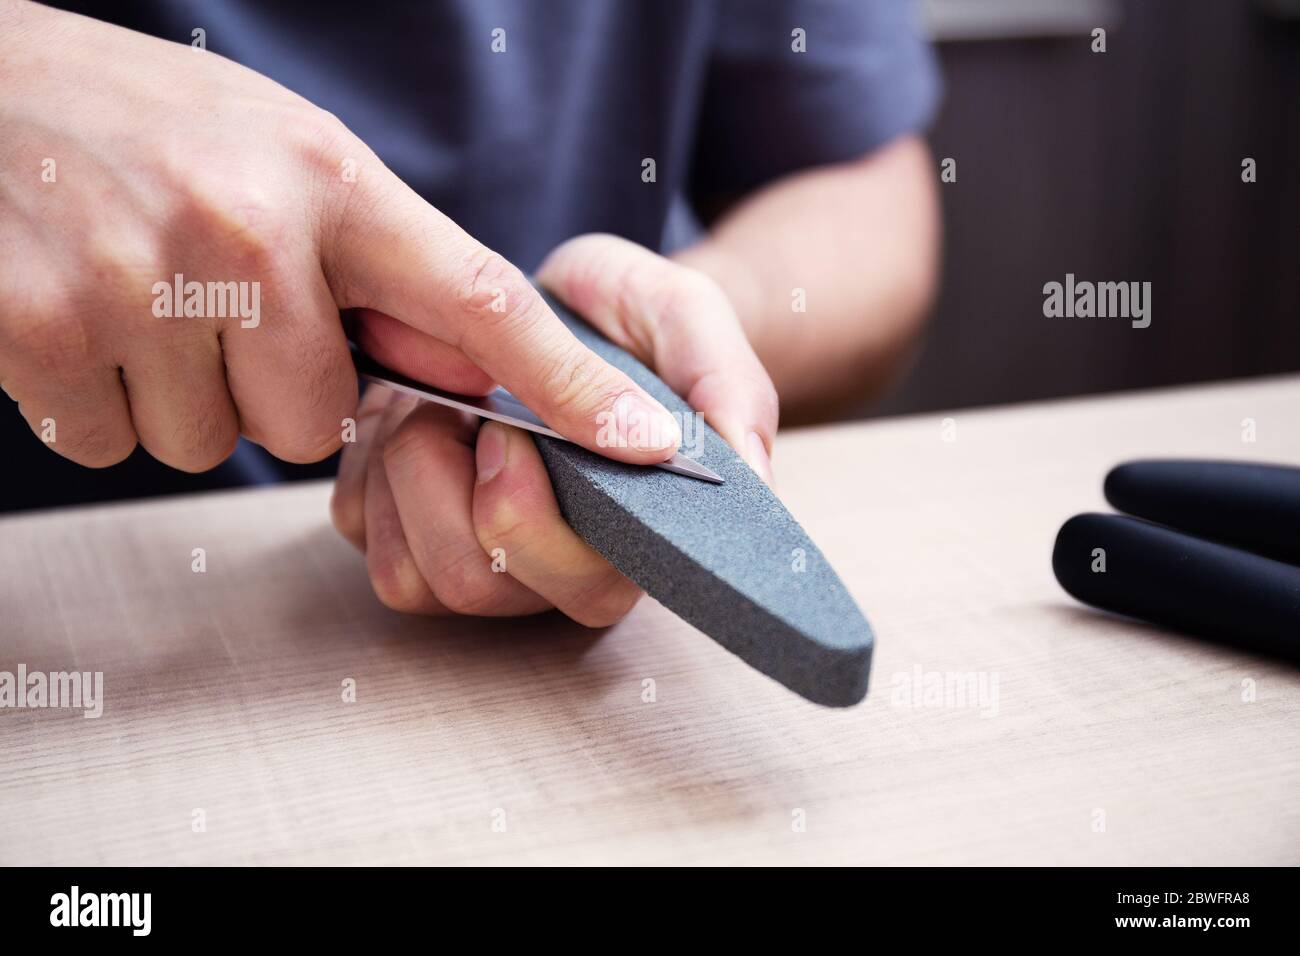 https://c8.alamy.com/comp/2BWFRA8/close-up-strong-male-hands-sharpen-a-kitchen-metal-knife-with-a-grindstone-home-household-knife-sharpening-2BWFRA8.jpg